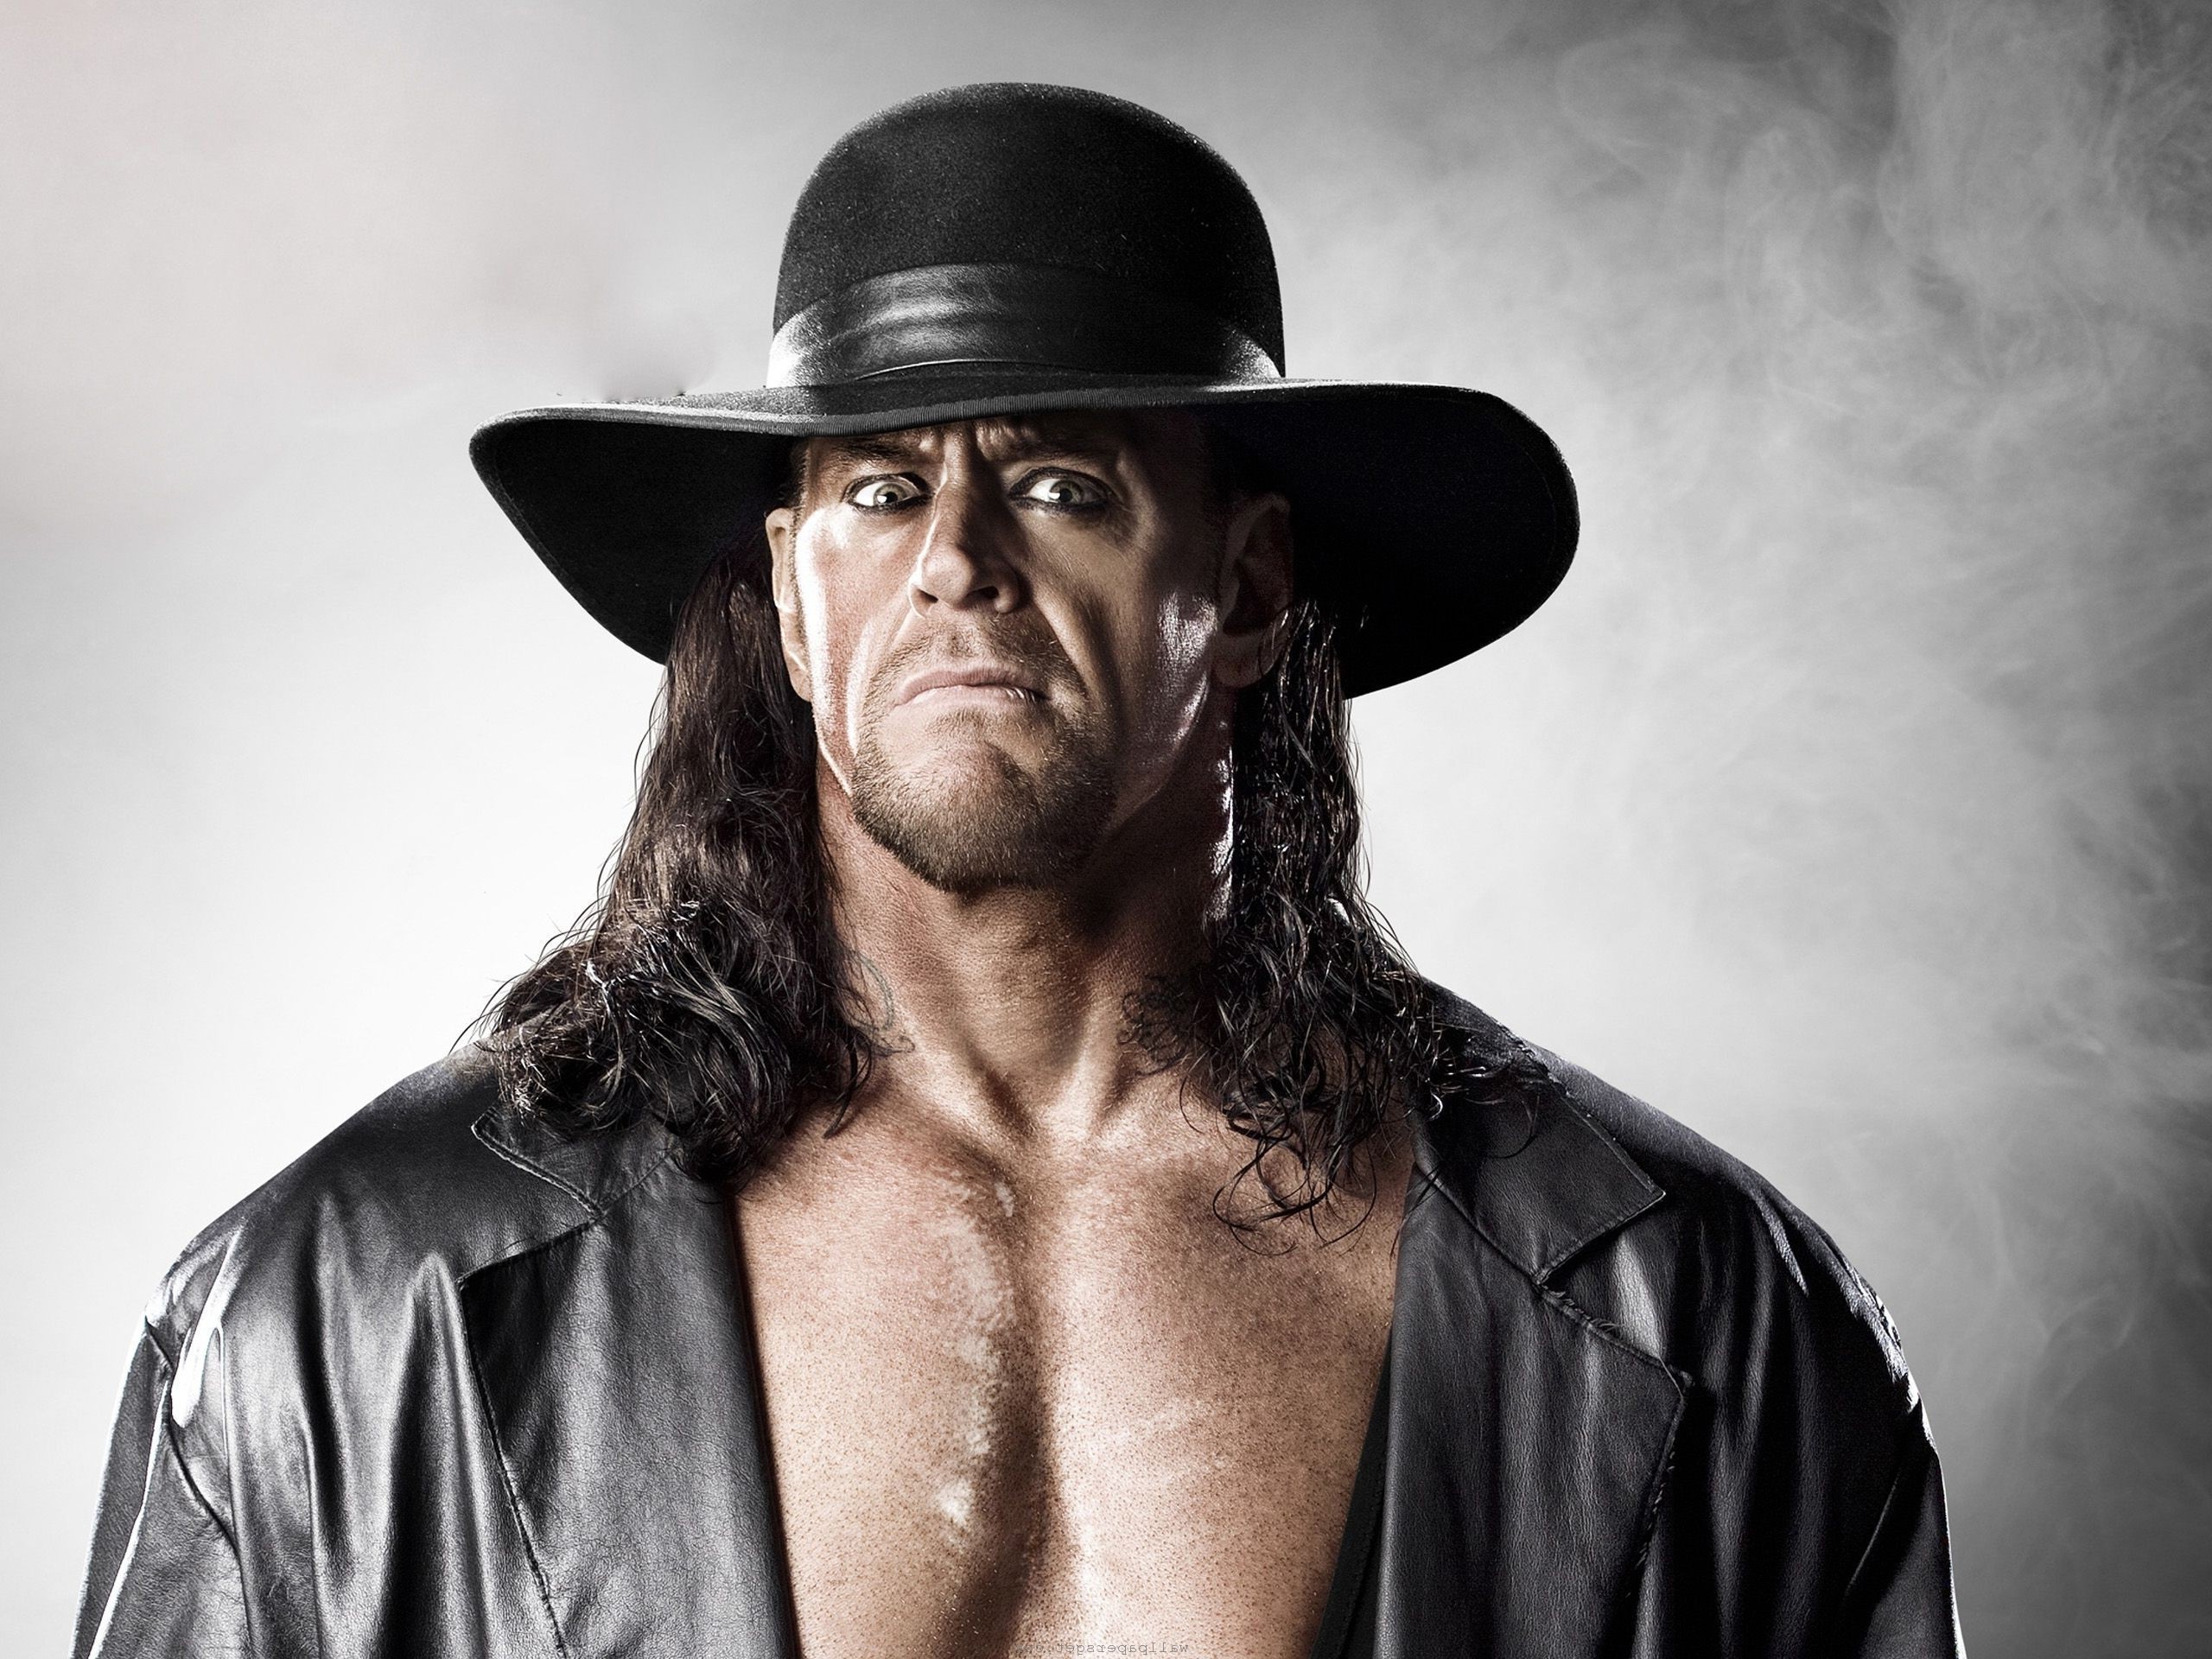 Check out Undertaker WWE Champion HD Photos And Undertaker HD Wallpapers in widescreen resolution See WWE Superstar High Definition hd Images And The